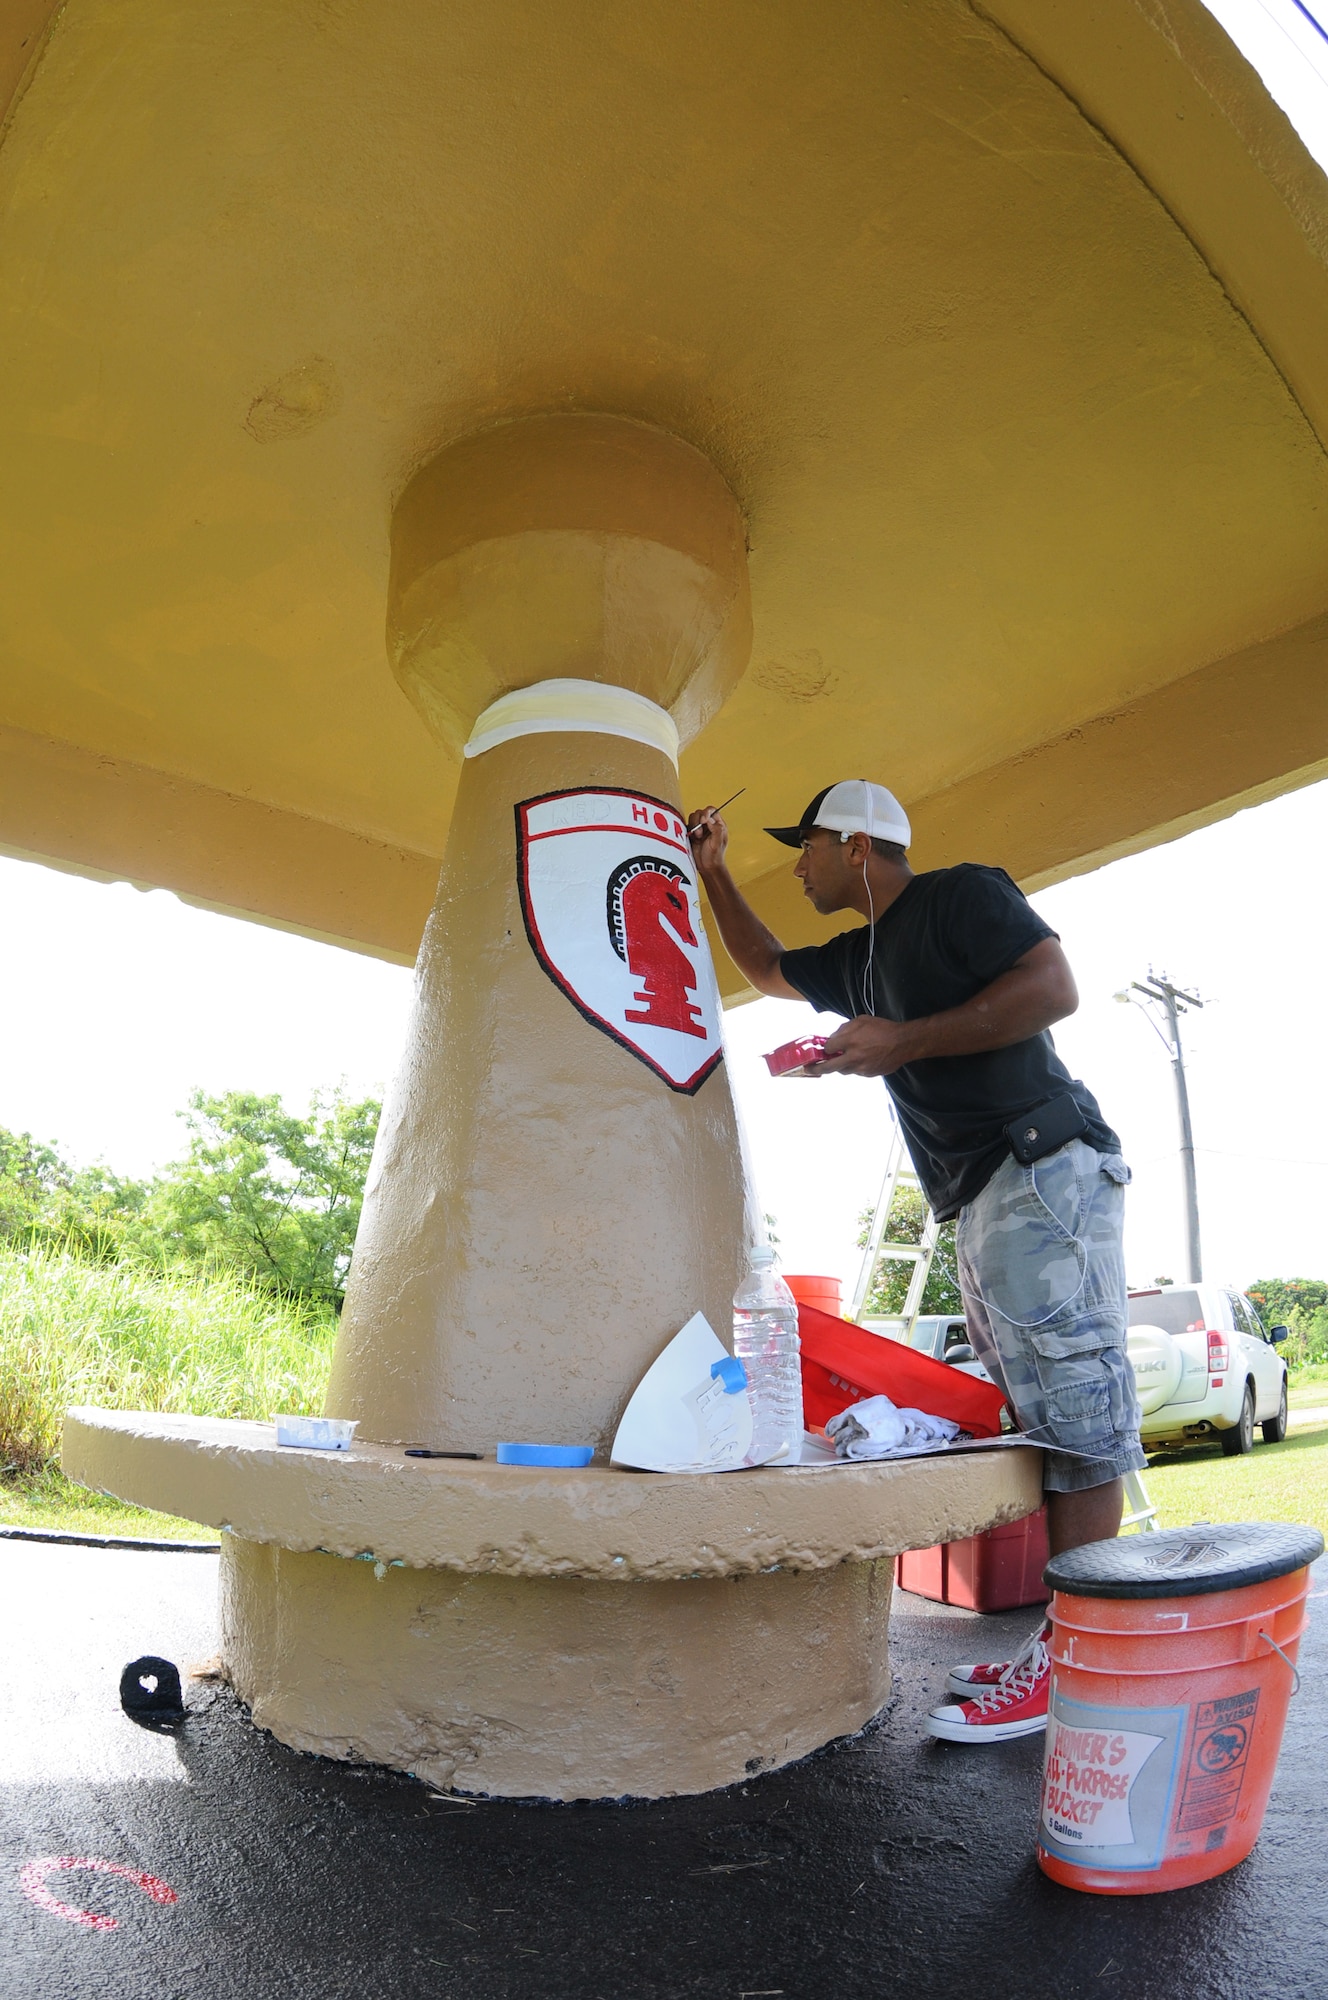 ANDERSEN AIR FORCE BASE, Guam - Staff Sgt. Cameron Pleasant, 554th RED
HORSE Squadron structures shop, works on the RED HORSE emblem on the bus
stop the squadron has adopted within the local community, April 7. Members
of the squadron have volunteered more than 100 hours to ensure the stop
looks perfect for the local school children. (U.S. Air Force photo / Senior
Airman Carlin Leslie)
